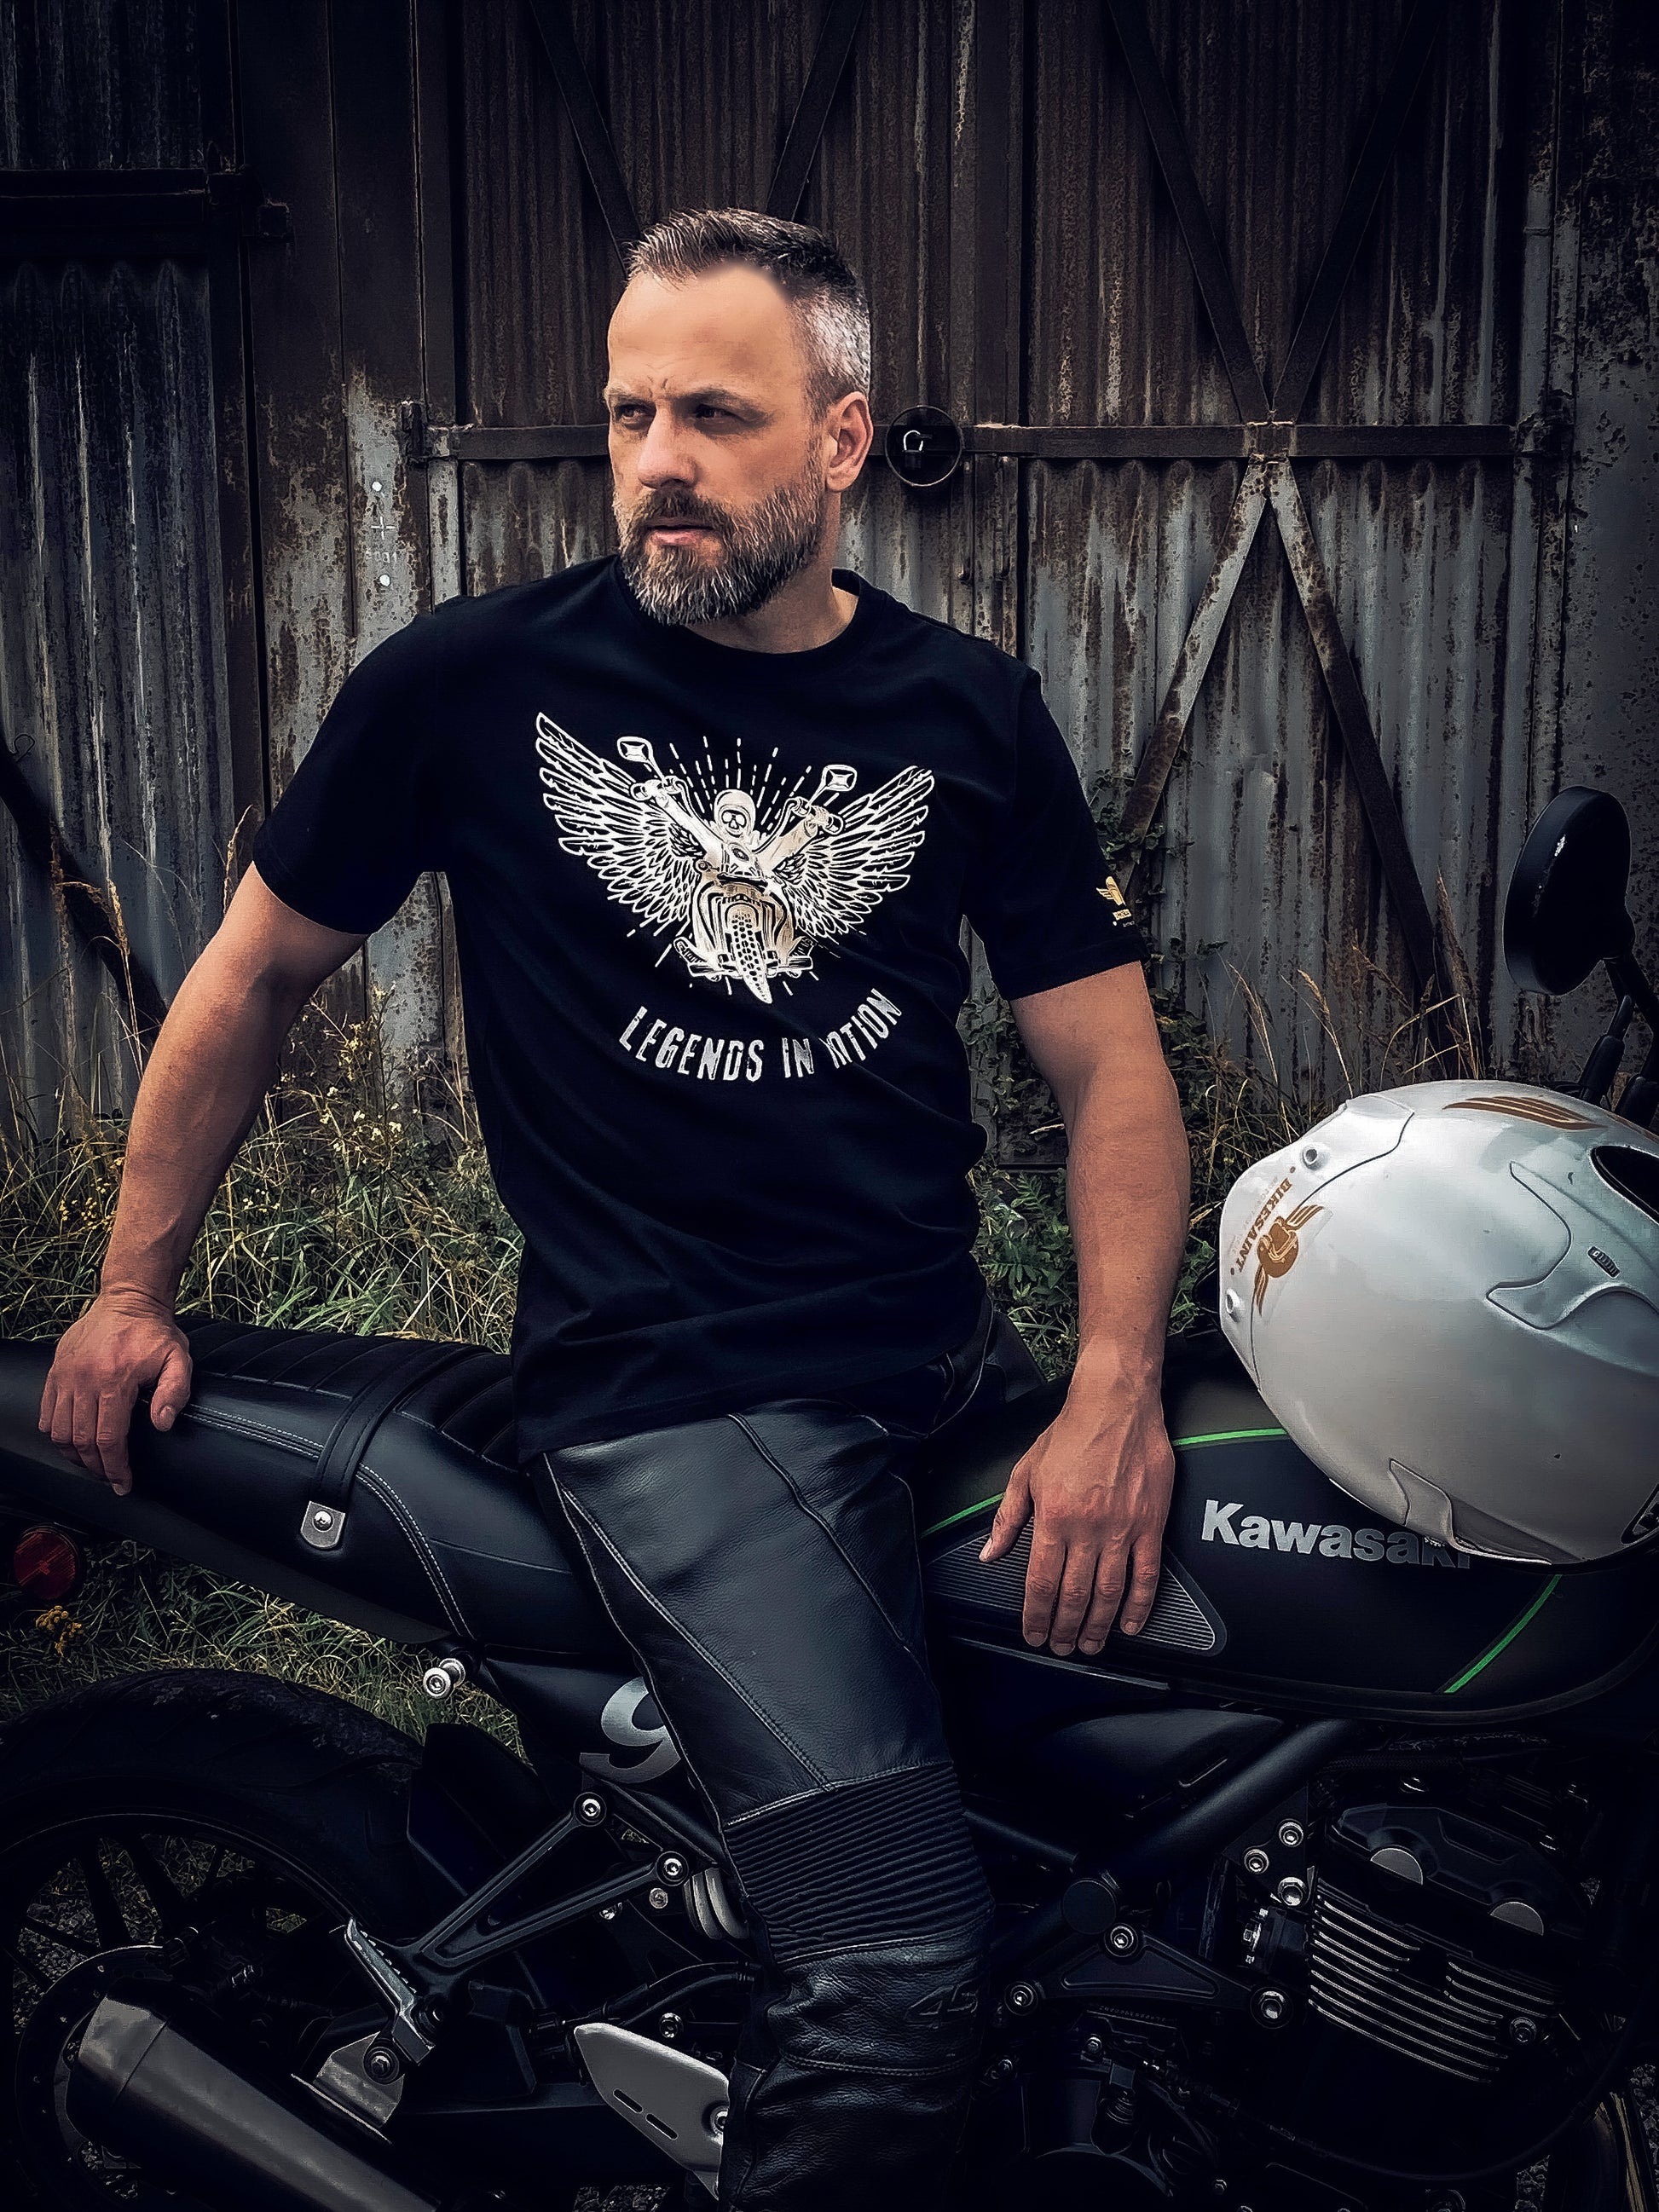 Legends in motion motorcycle t-shirt